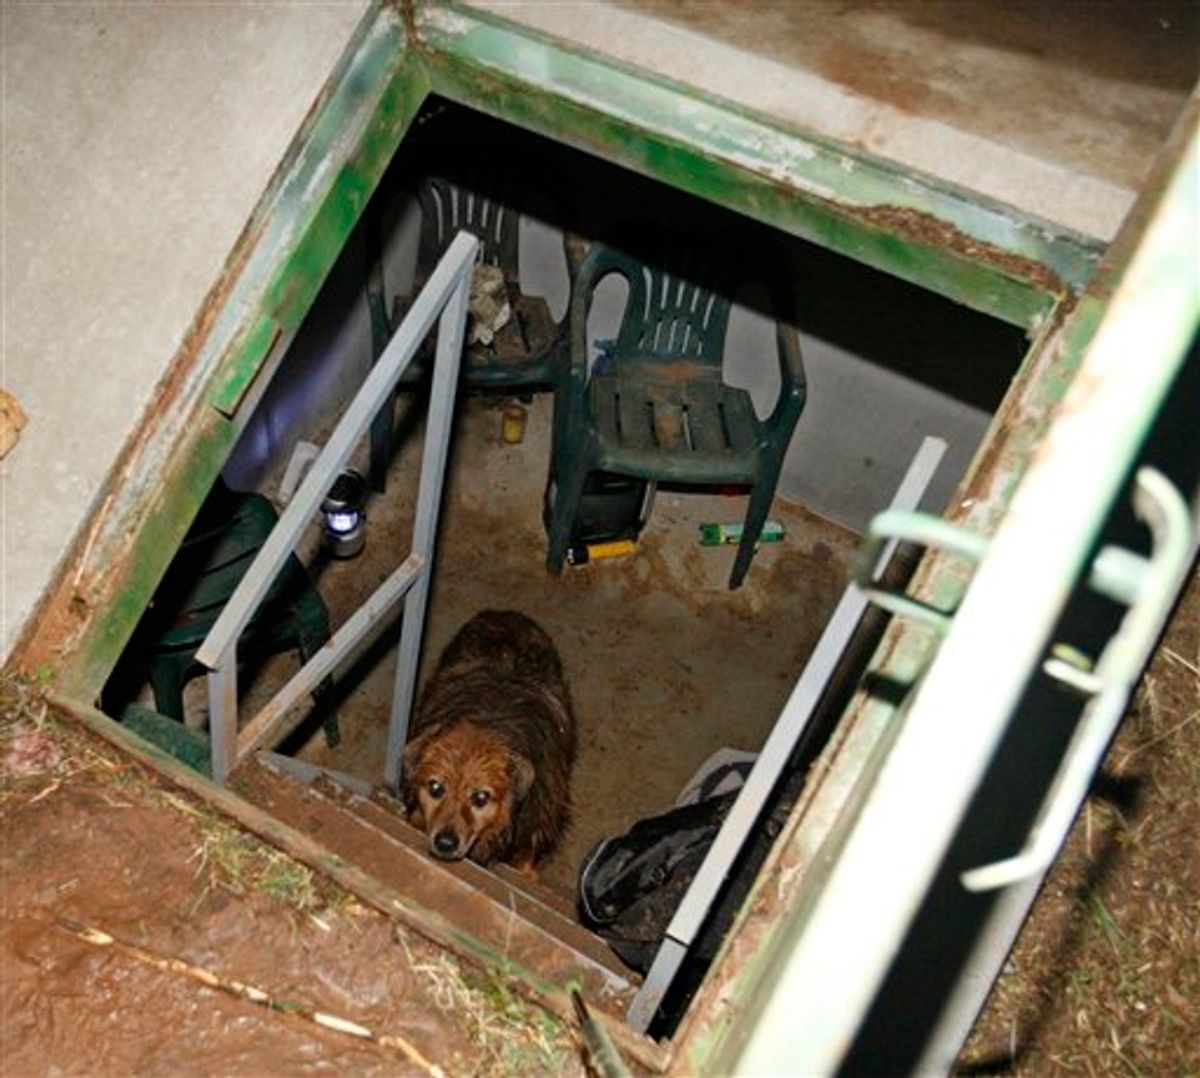 Duke looks up from a storm shelter at the Robertson home in Piedmont, Okla., Tuesday, May 24, 2011. Duke was actually in the bathtub during the start of the tornado, and later found running in a pasture.  Violent thunderstorms roared across middle America on Tuesday, killing seven people in two states, with several tornadoes touching down in Oklahoma. (AP Photo/Sue Ogrocki) (AP)